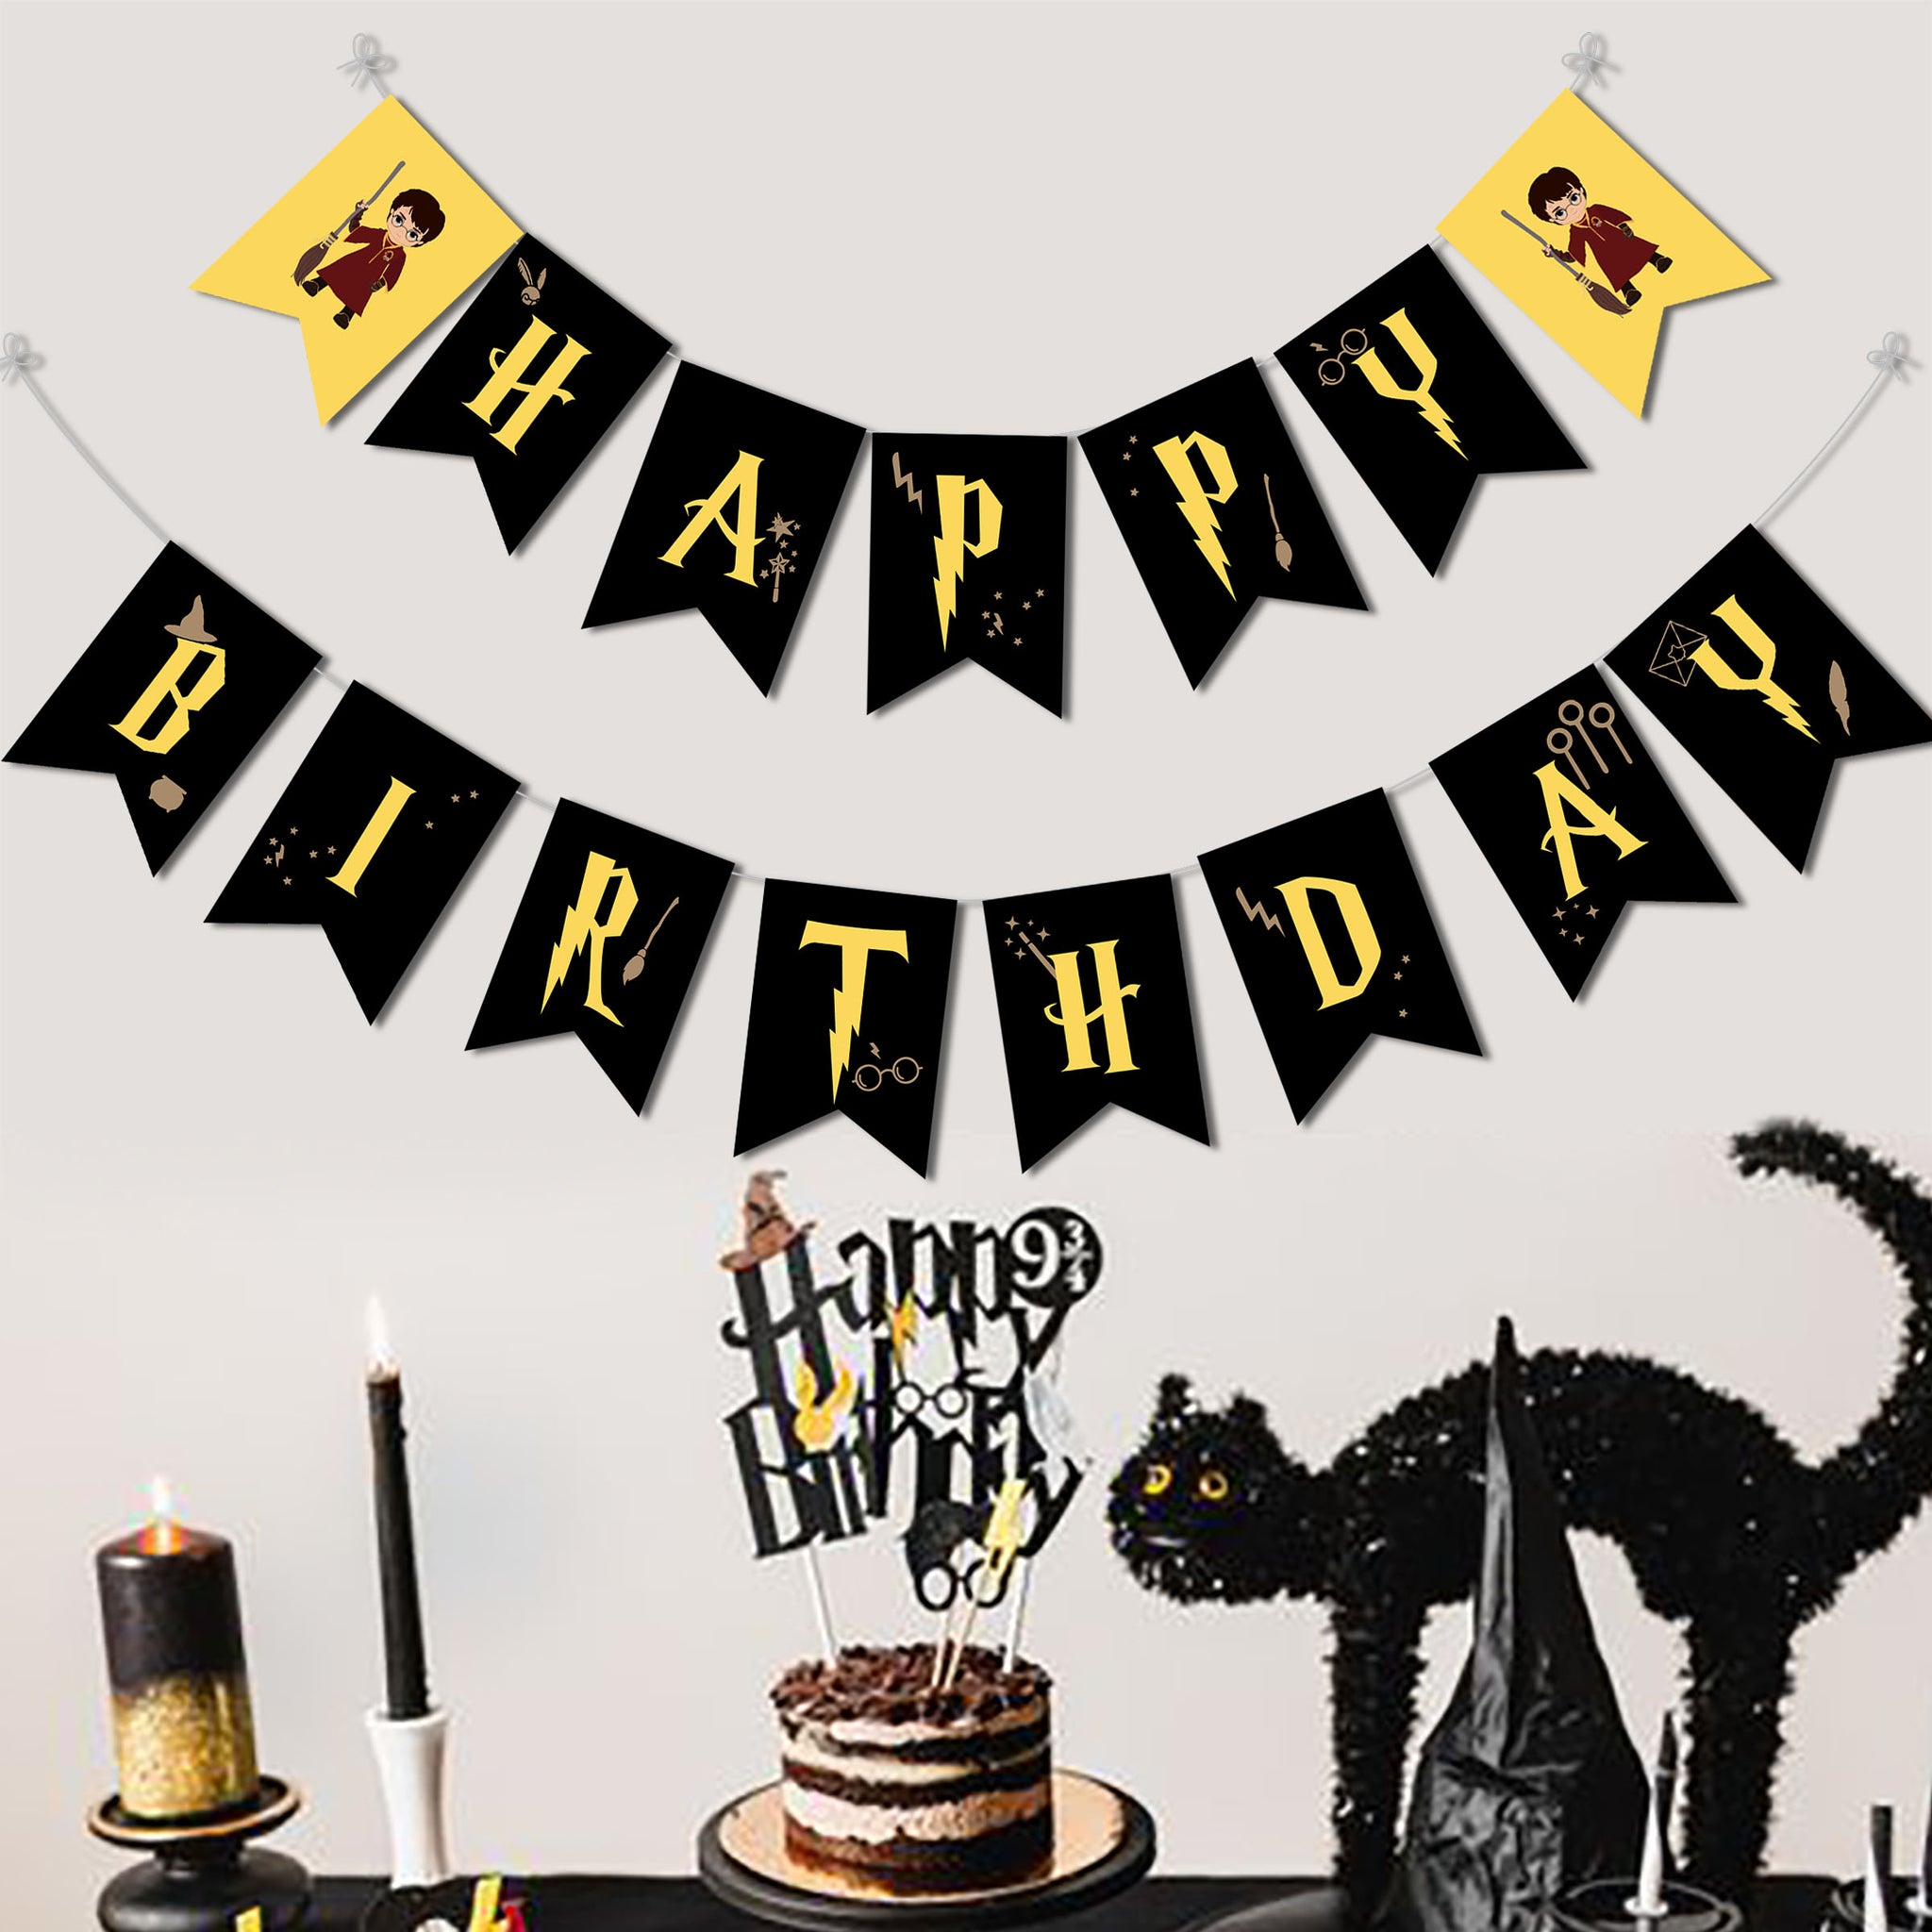 Harry Potter Birthday Banner Kit Party Supplies - The Party Place